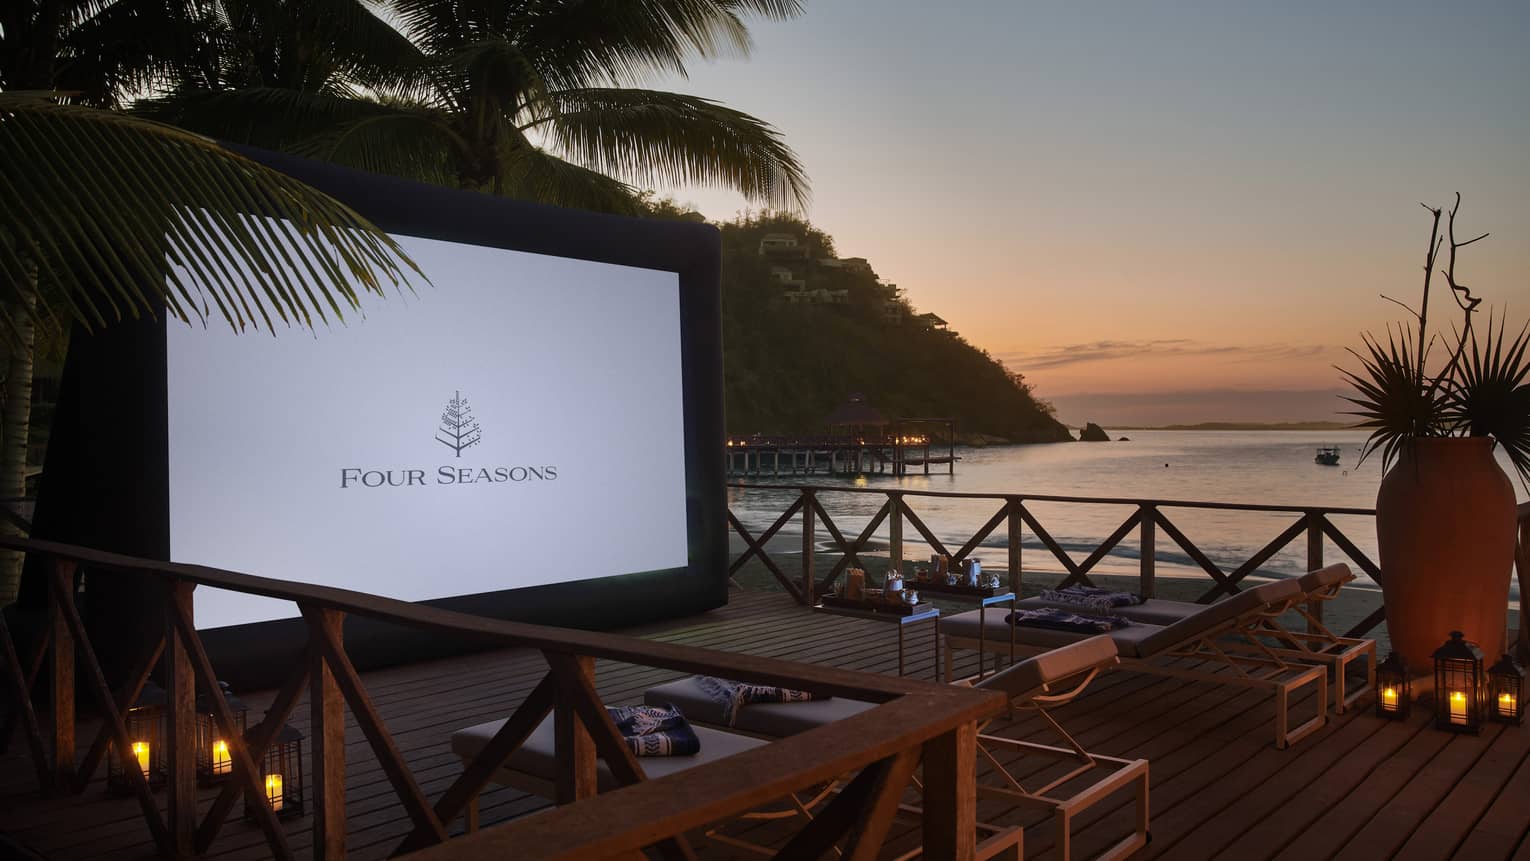 A large outdoor screen near palm trees and the ocean.